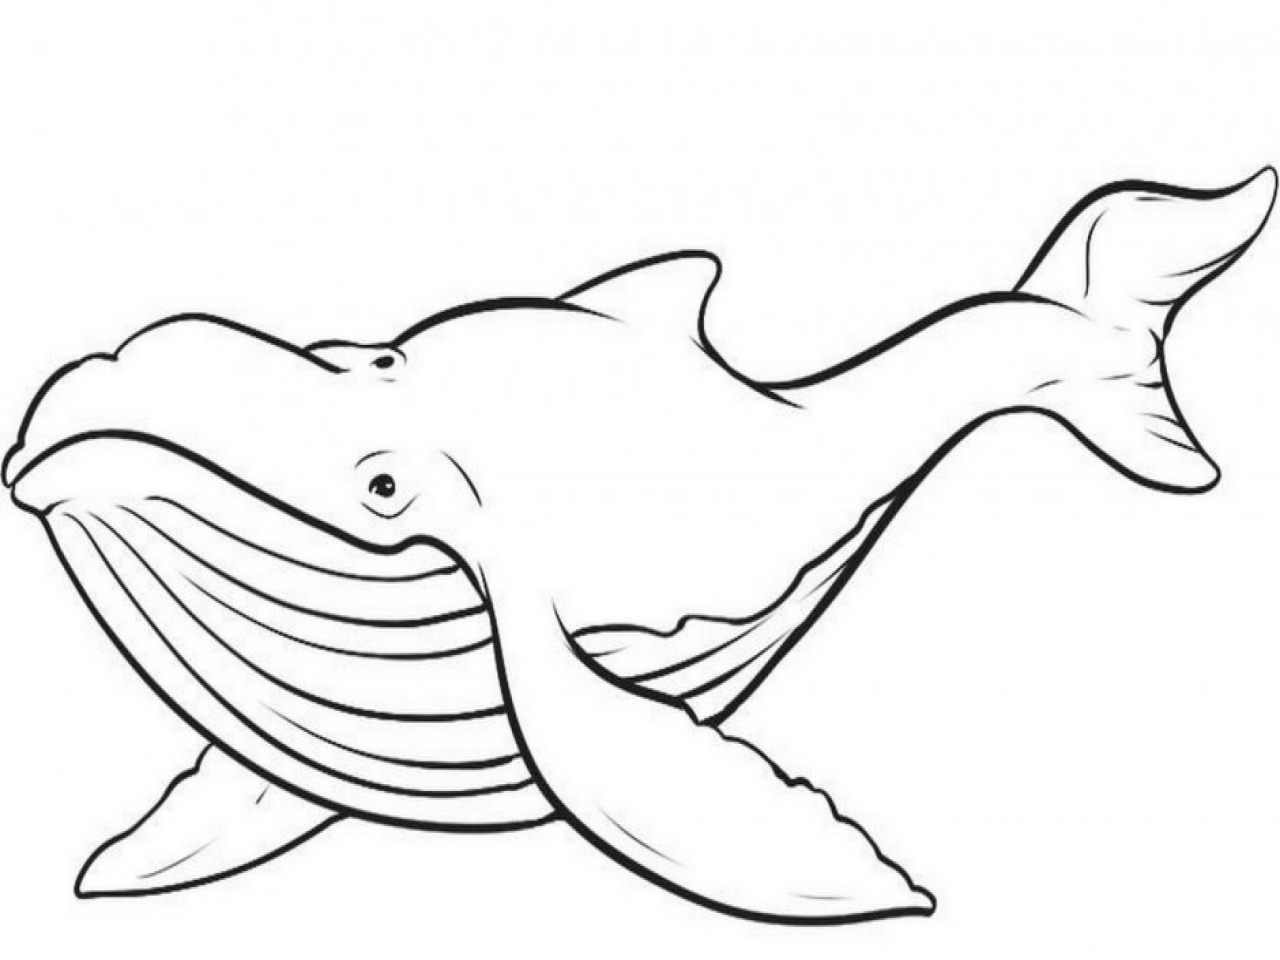 Shamu Coloring Pages Shamu Coloring Pages At Getdrawings Free For Personal Use